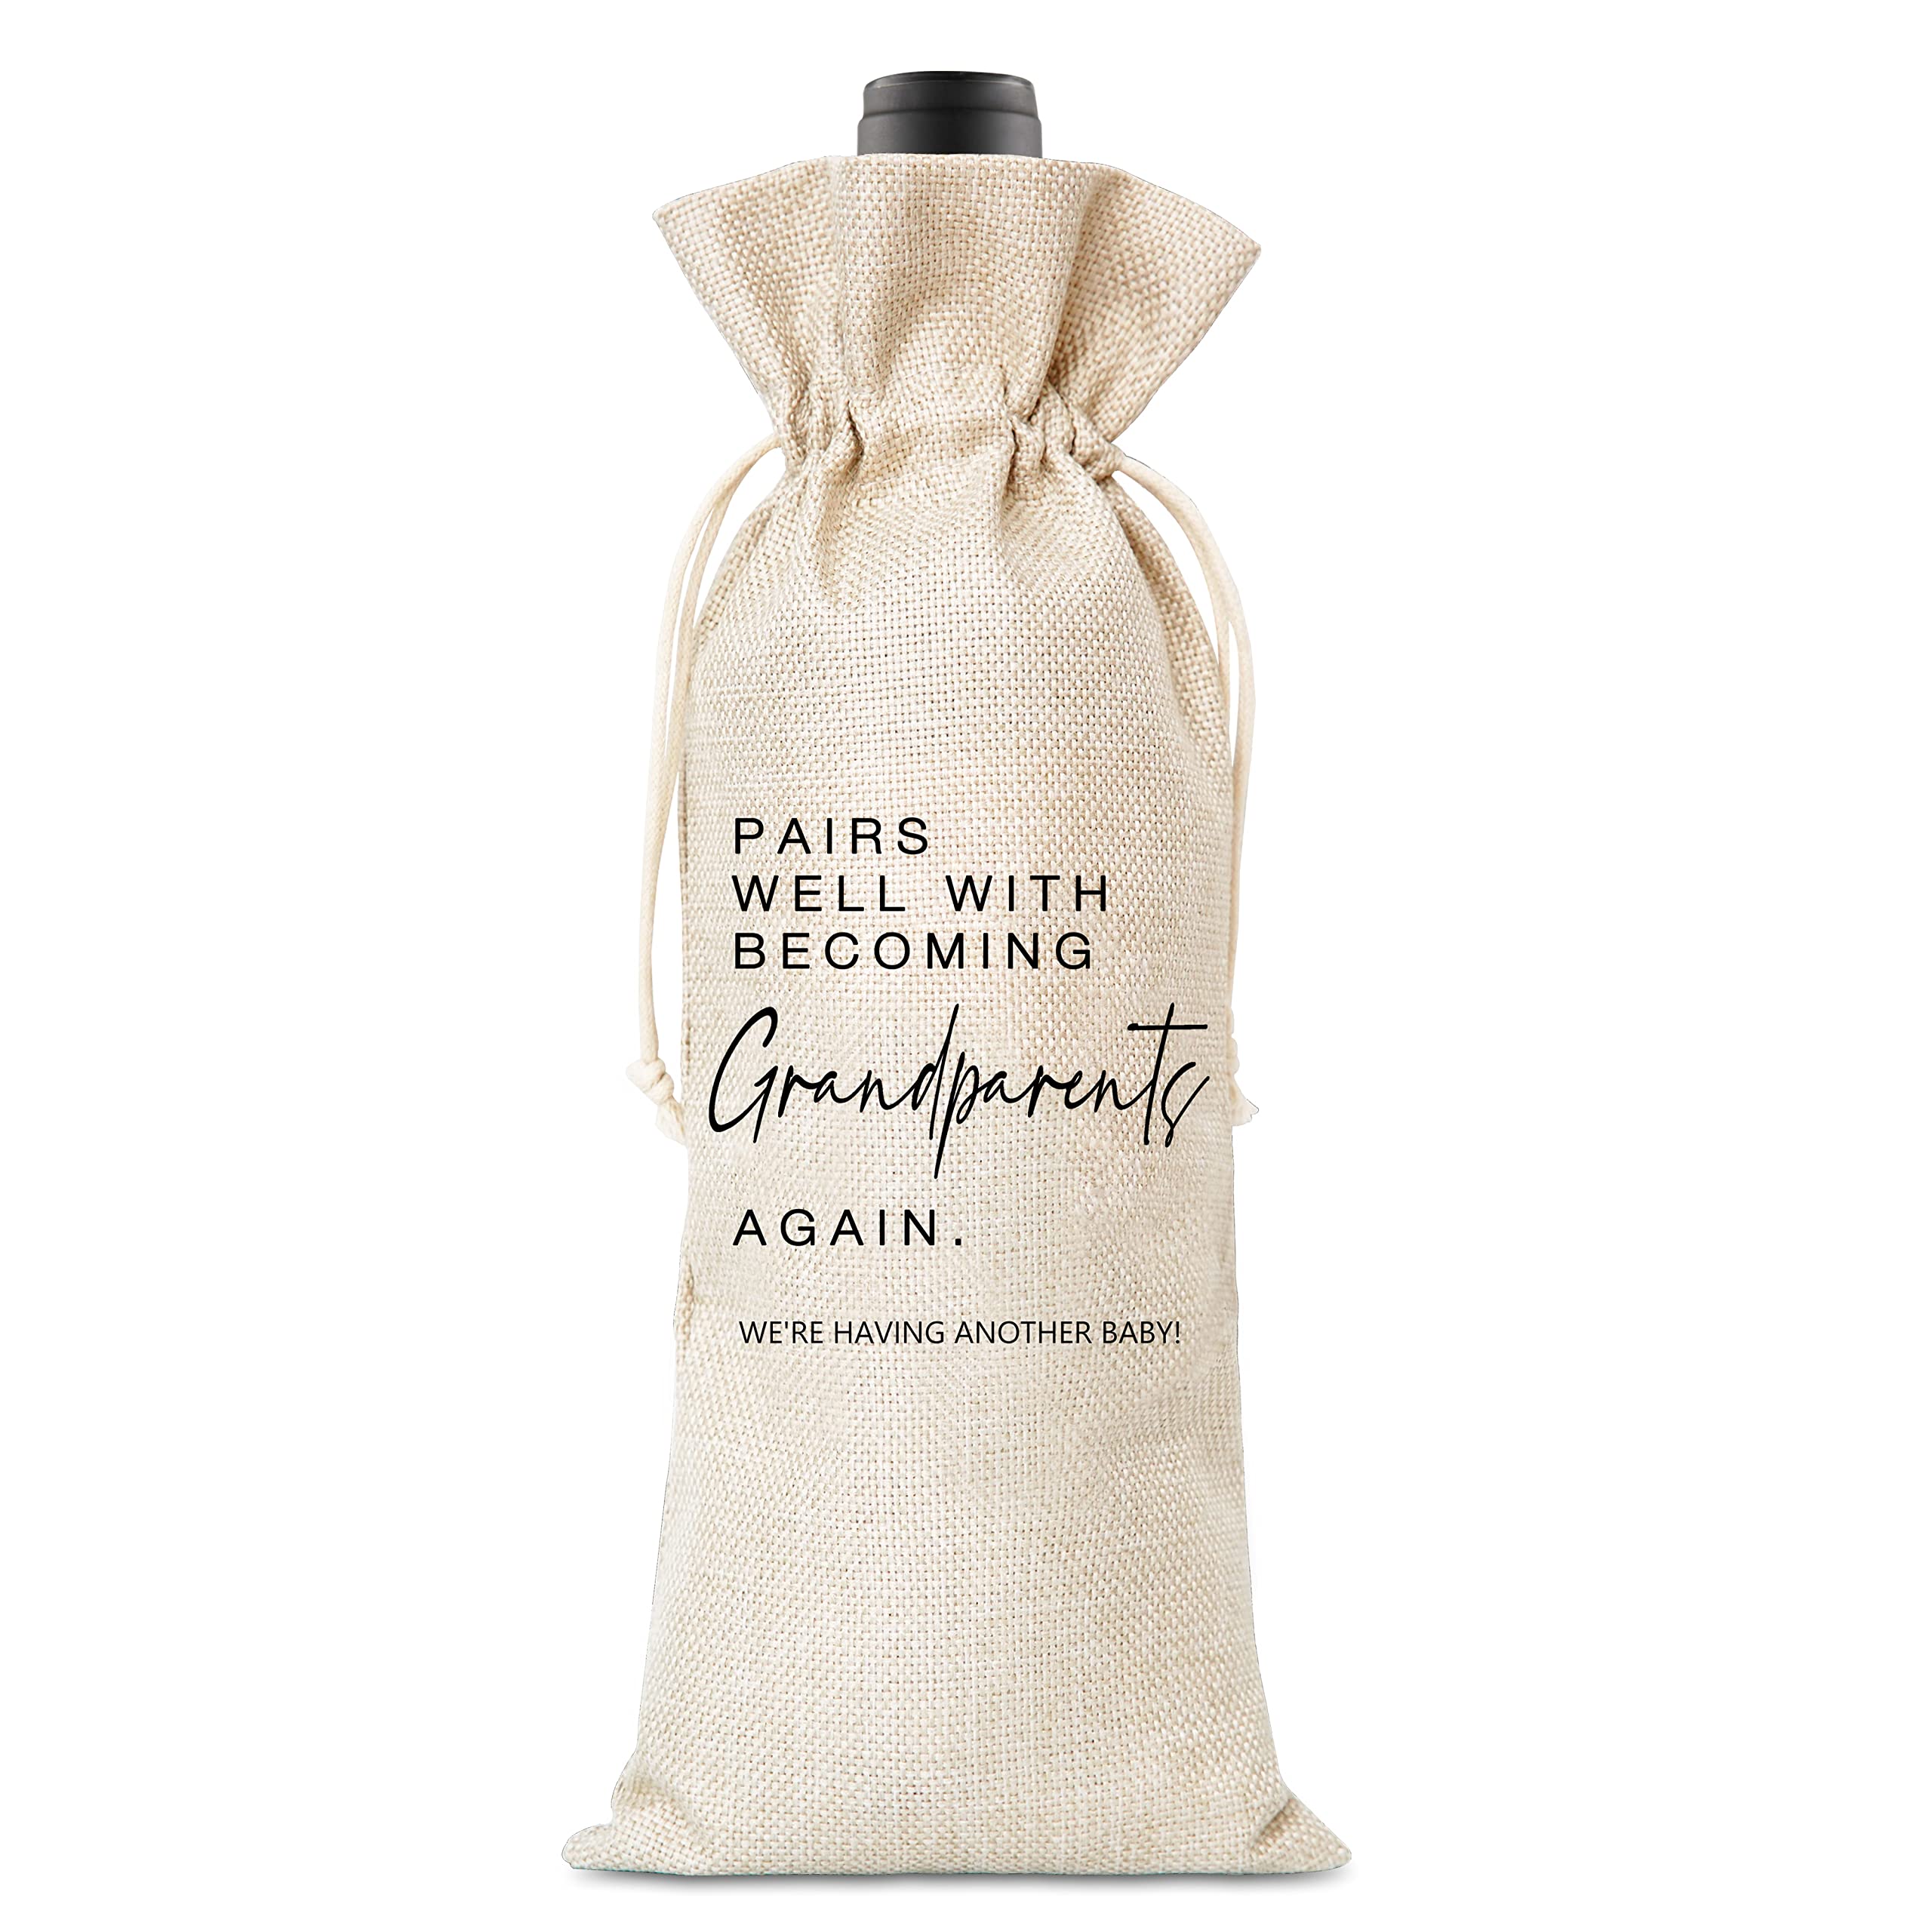 Baby Announcement Wine Bag, Pairs Well With Becoming Grandparent Again: We Are Having Another Baby, Pregnancy Announcement, New Grandparents - 1 Pack (WINEDAI-035)